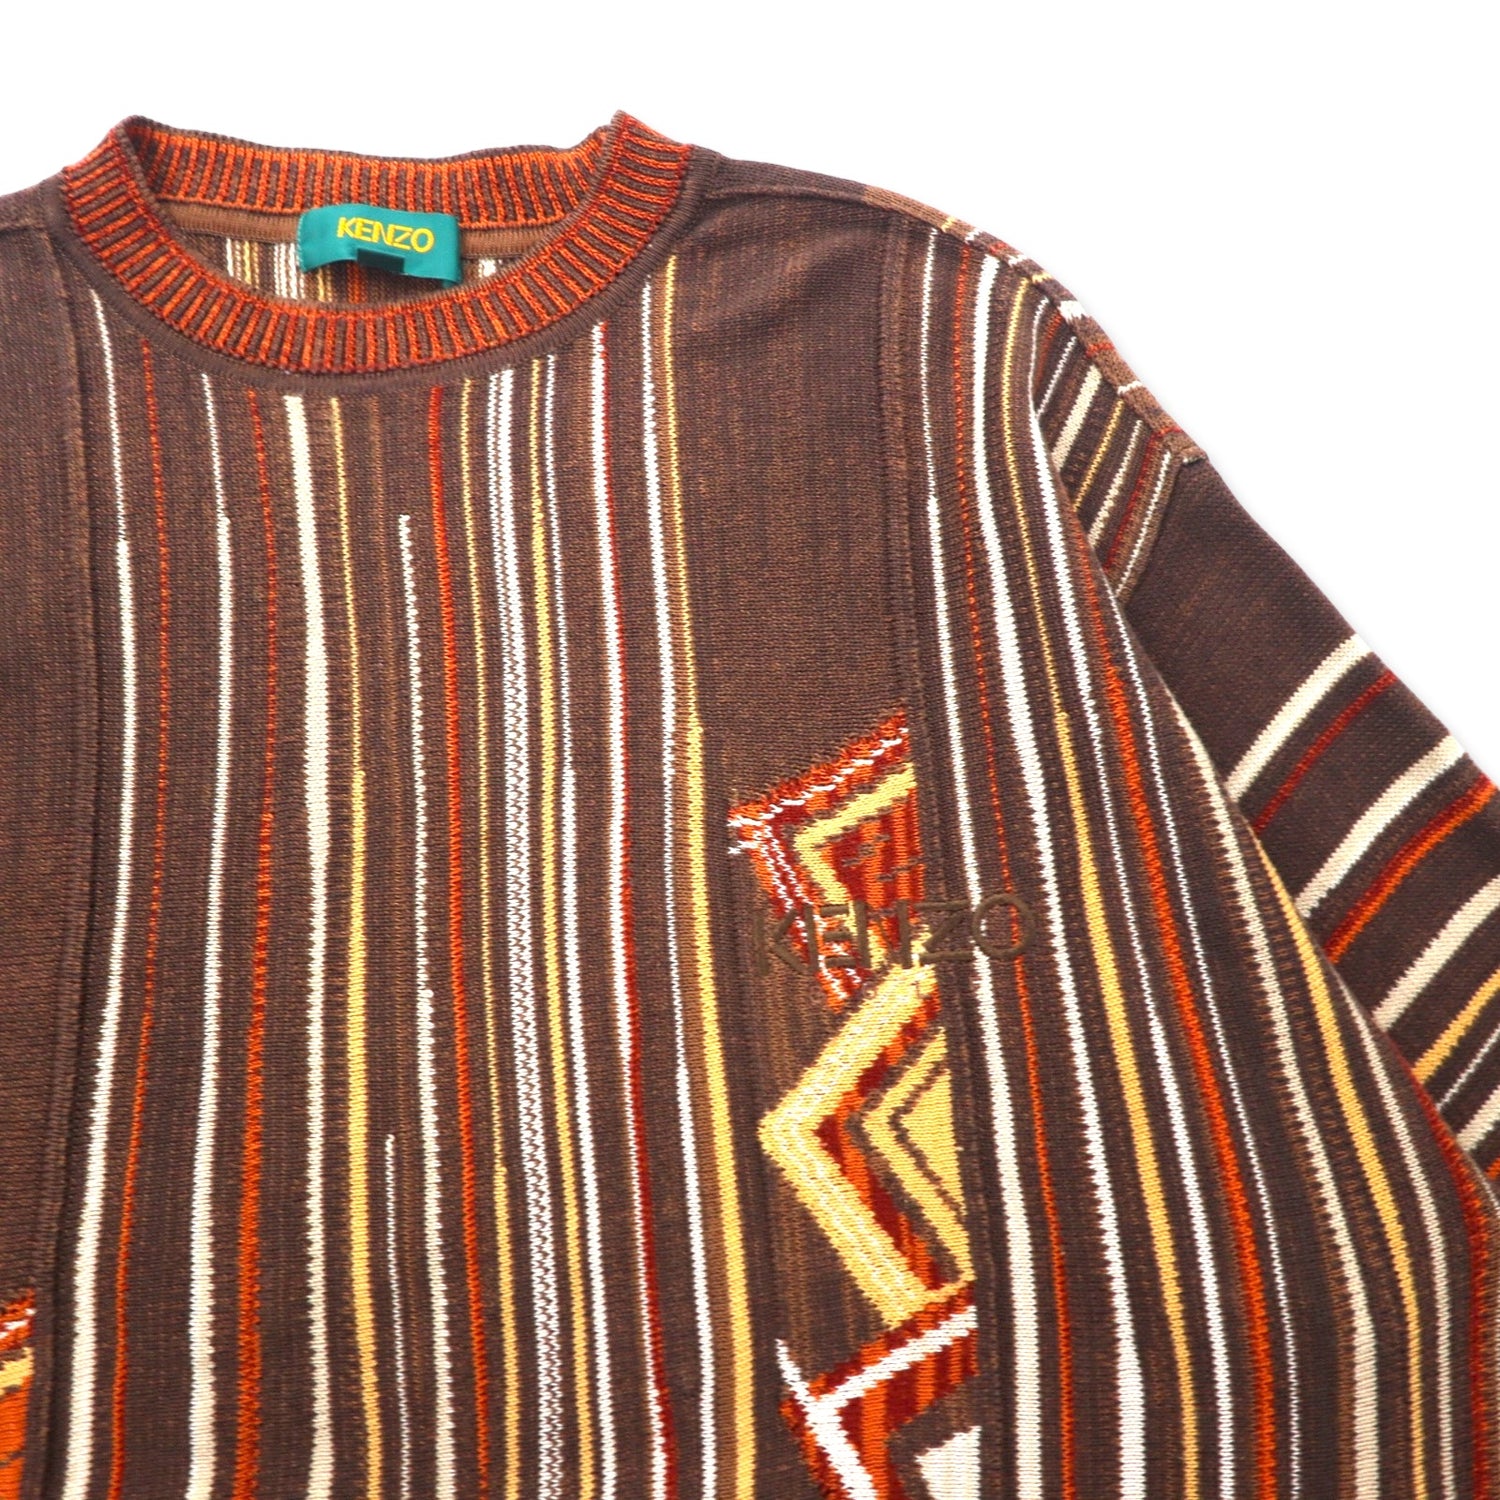 KENZO GOLF 90's Patterned Knit Sweater 3 Brown Cotton One Point 